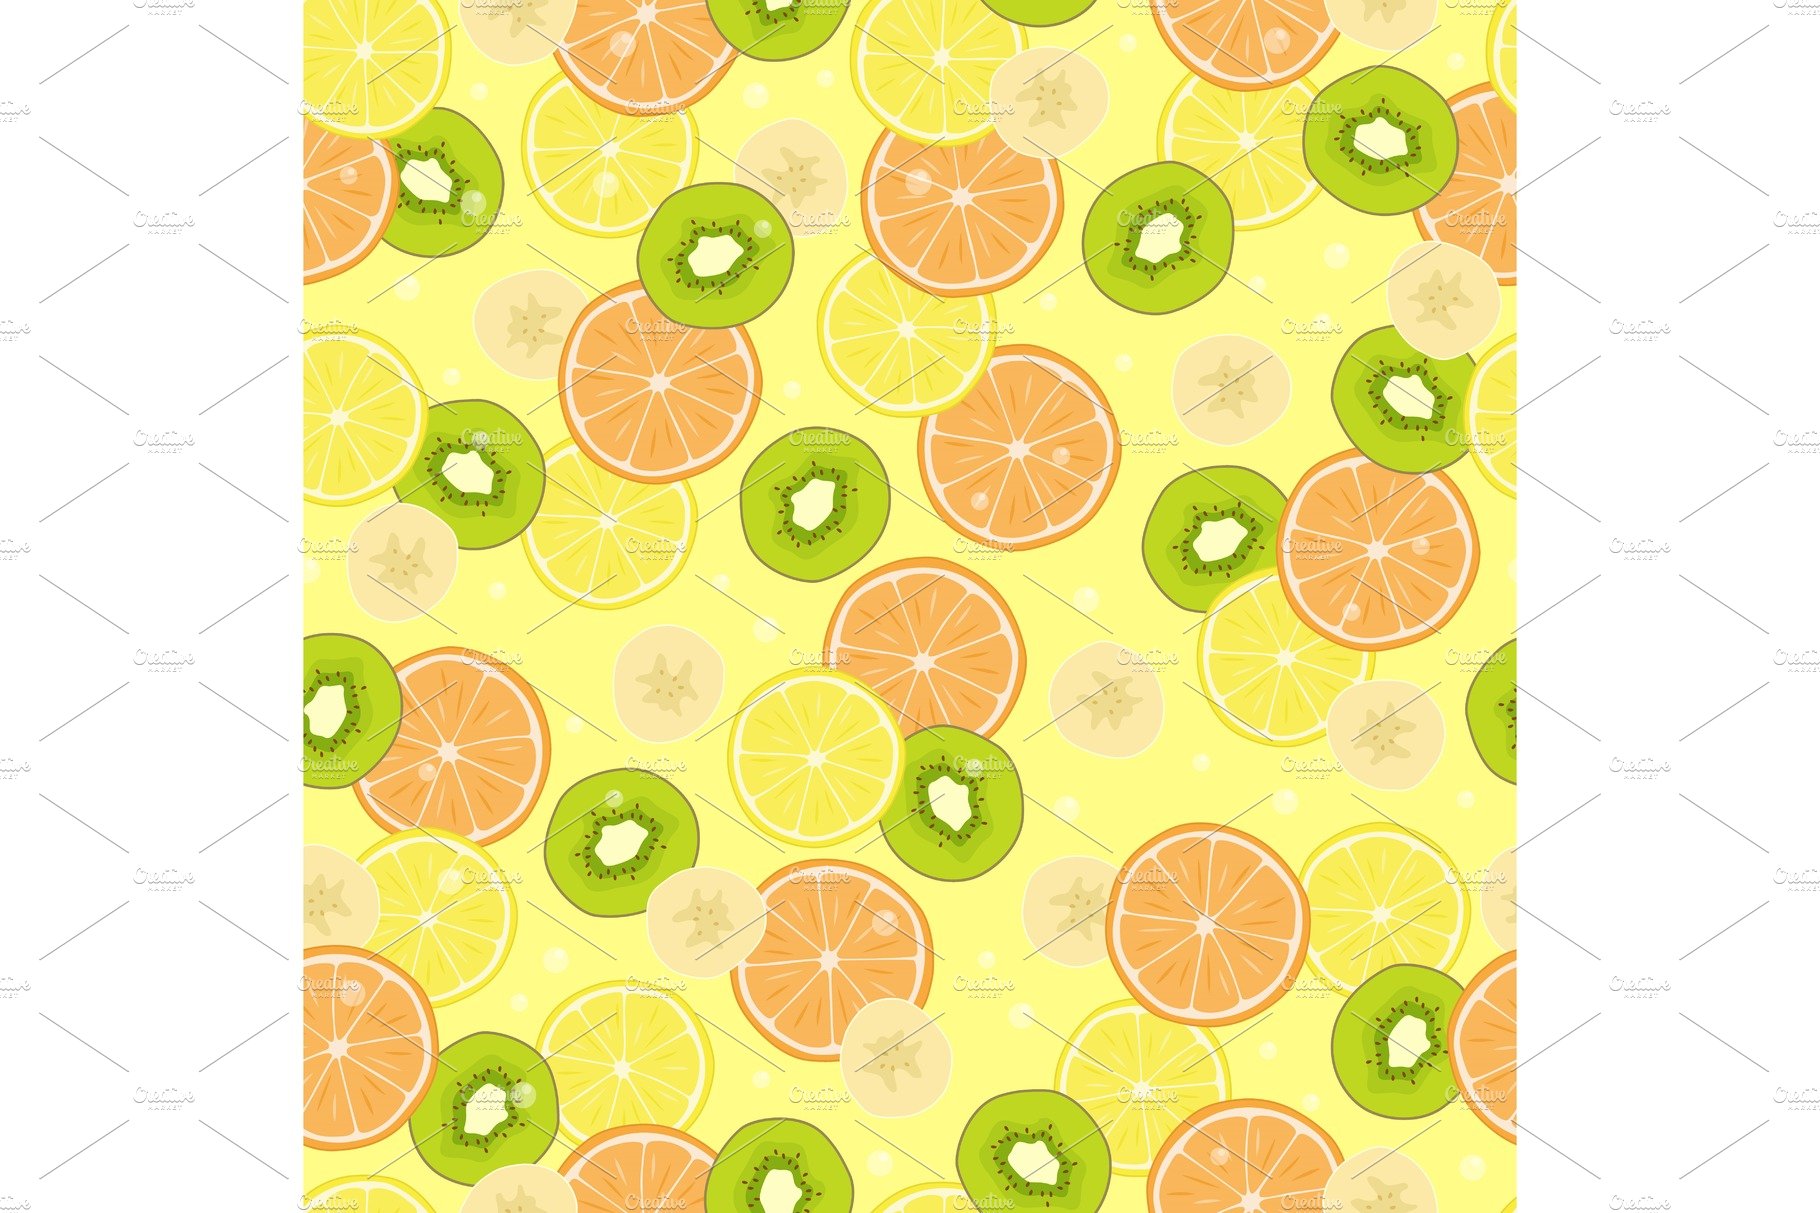 Seamless Pattern with Citrus Fruits cover image.